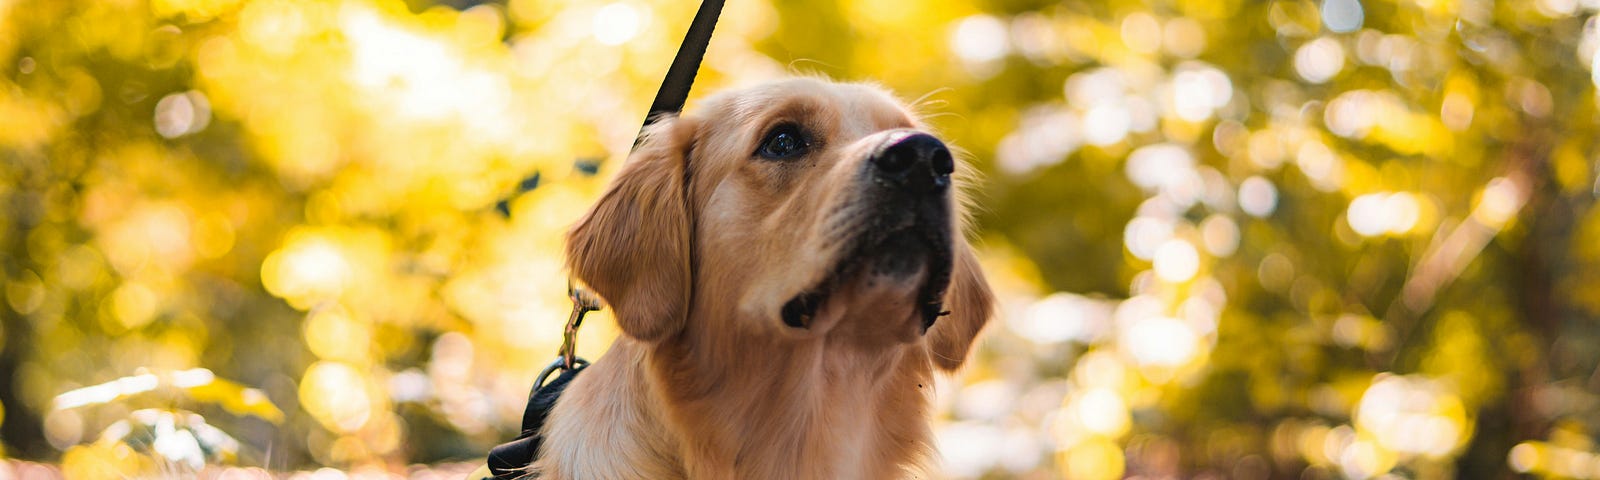 A golden retriever with a yellow and black K9 harness laying down in leaves while on a leash. In the back are yellowish-gold bushes/grass that is blurred out. The leaves/ground beneath the dog is brown. He is gazing up at his handler out of frame.